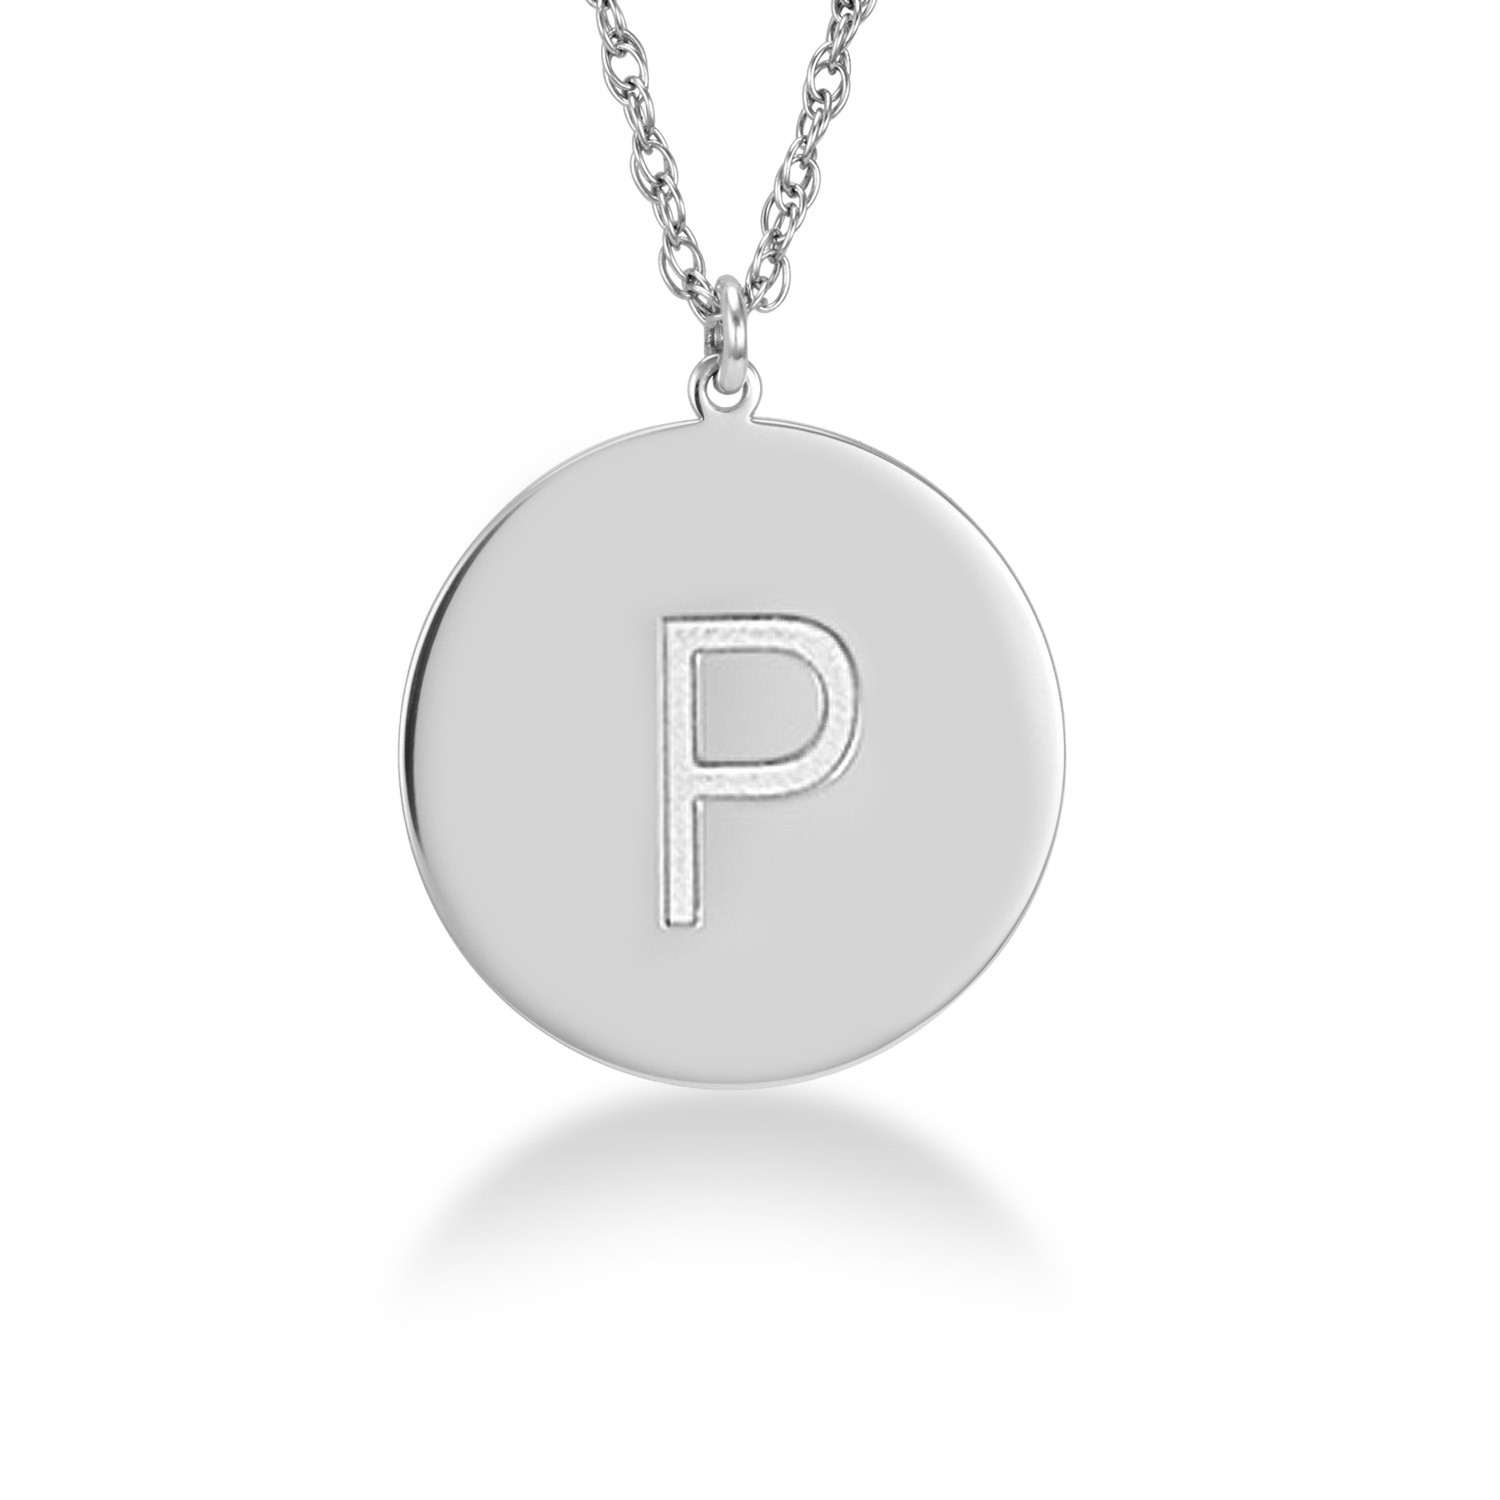 1 inch 14k White Gold Monogram Engraved Disc Charm Necklace